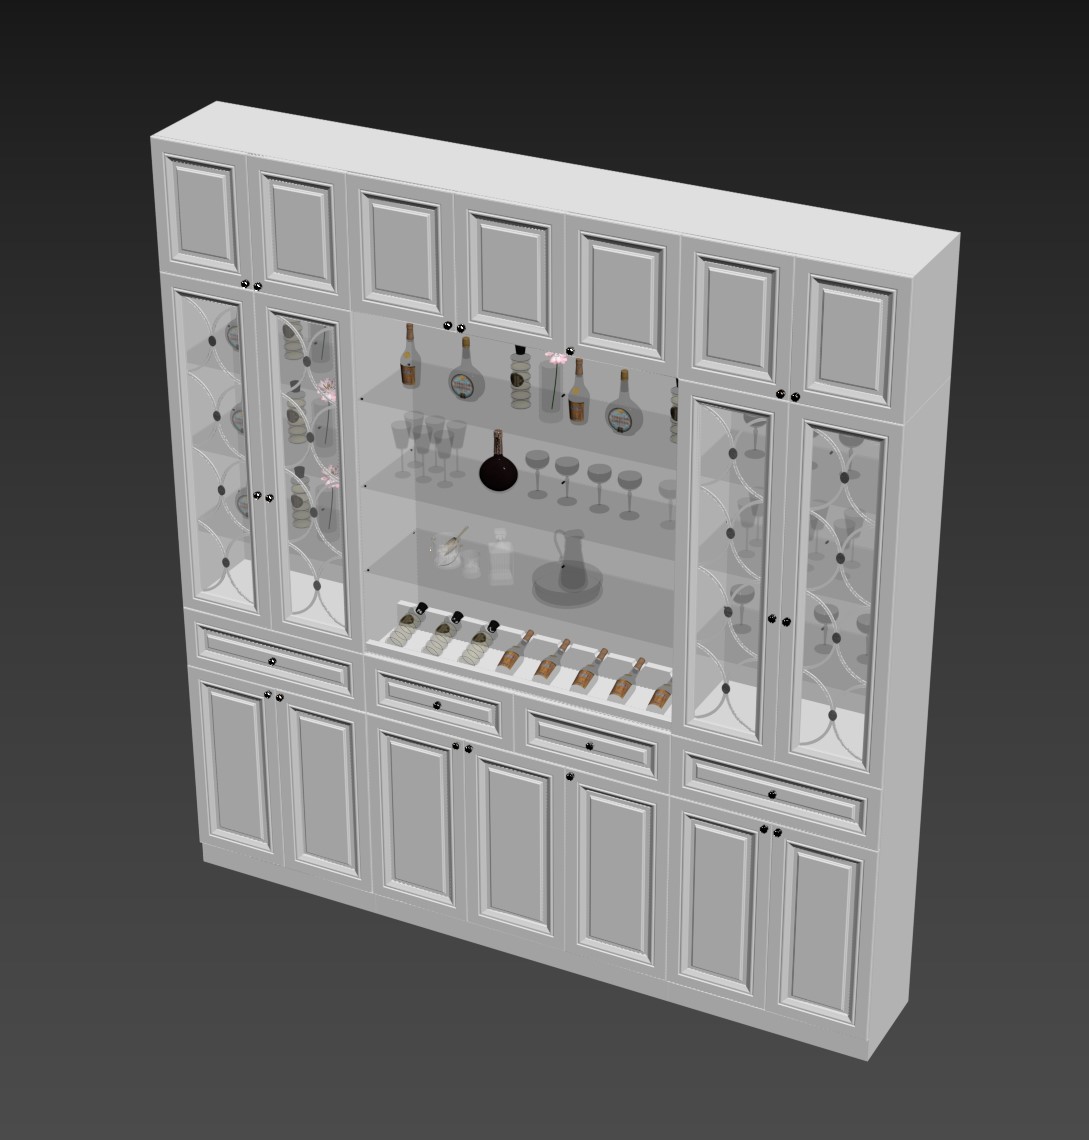 9989. Download Free Wine Cabinet Model by Nguyen The Hung